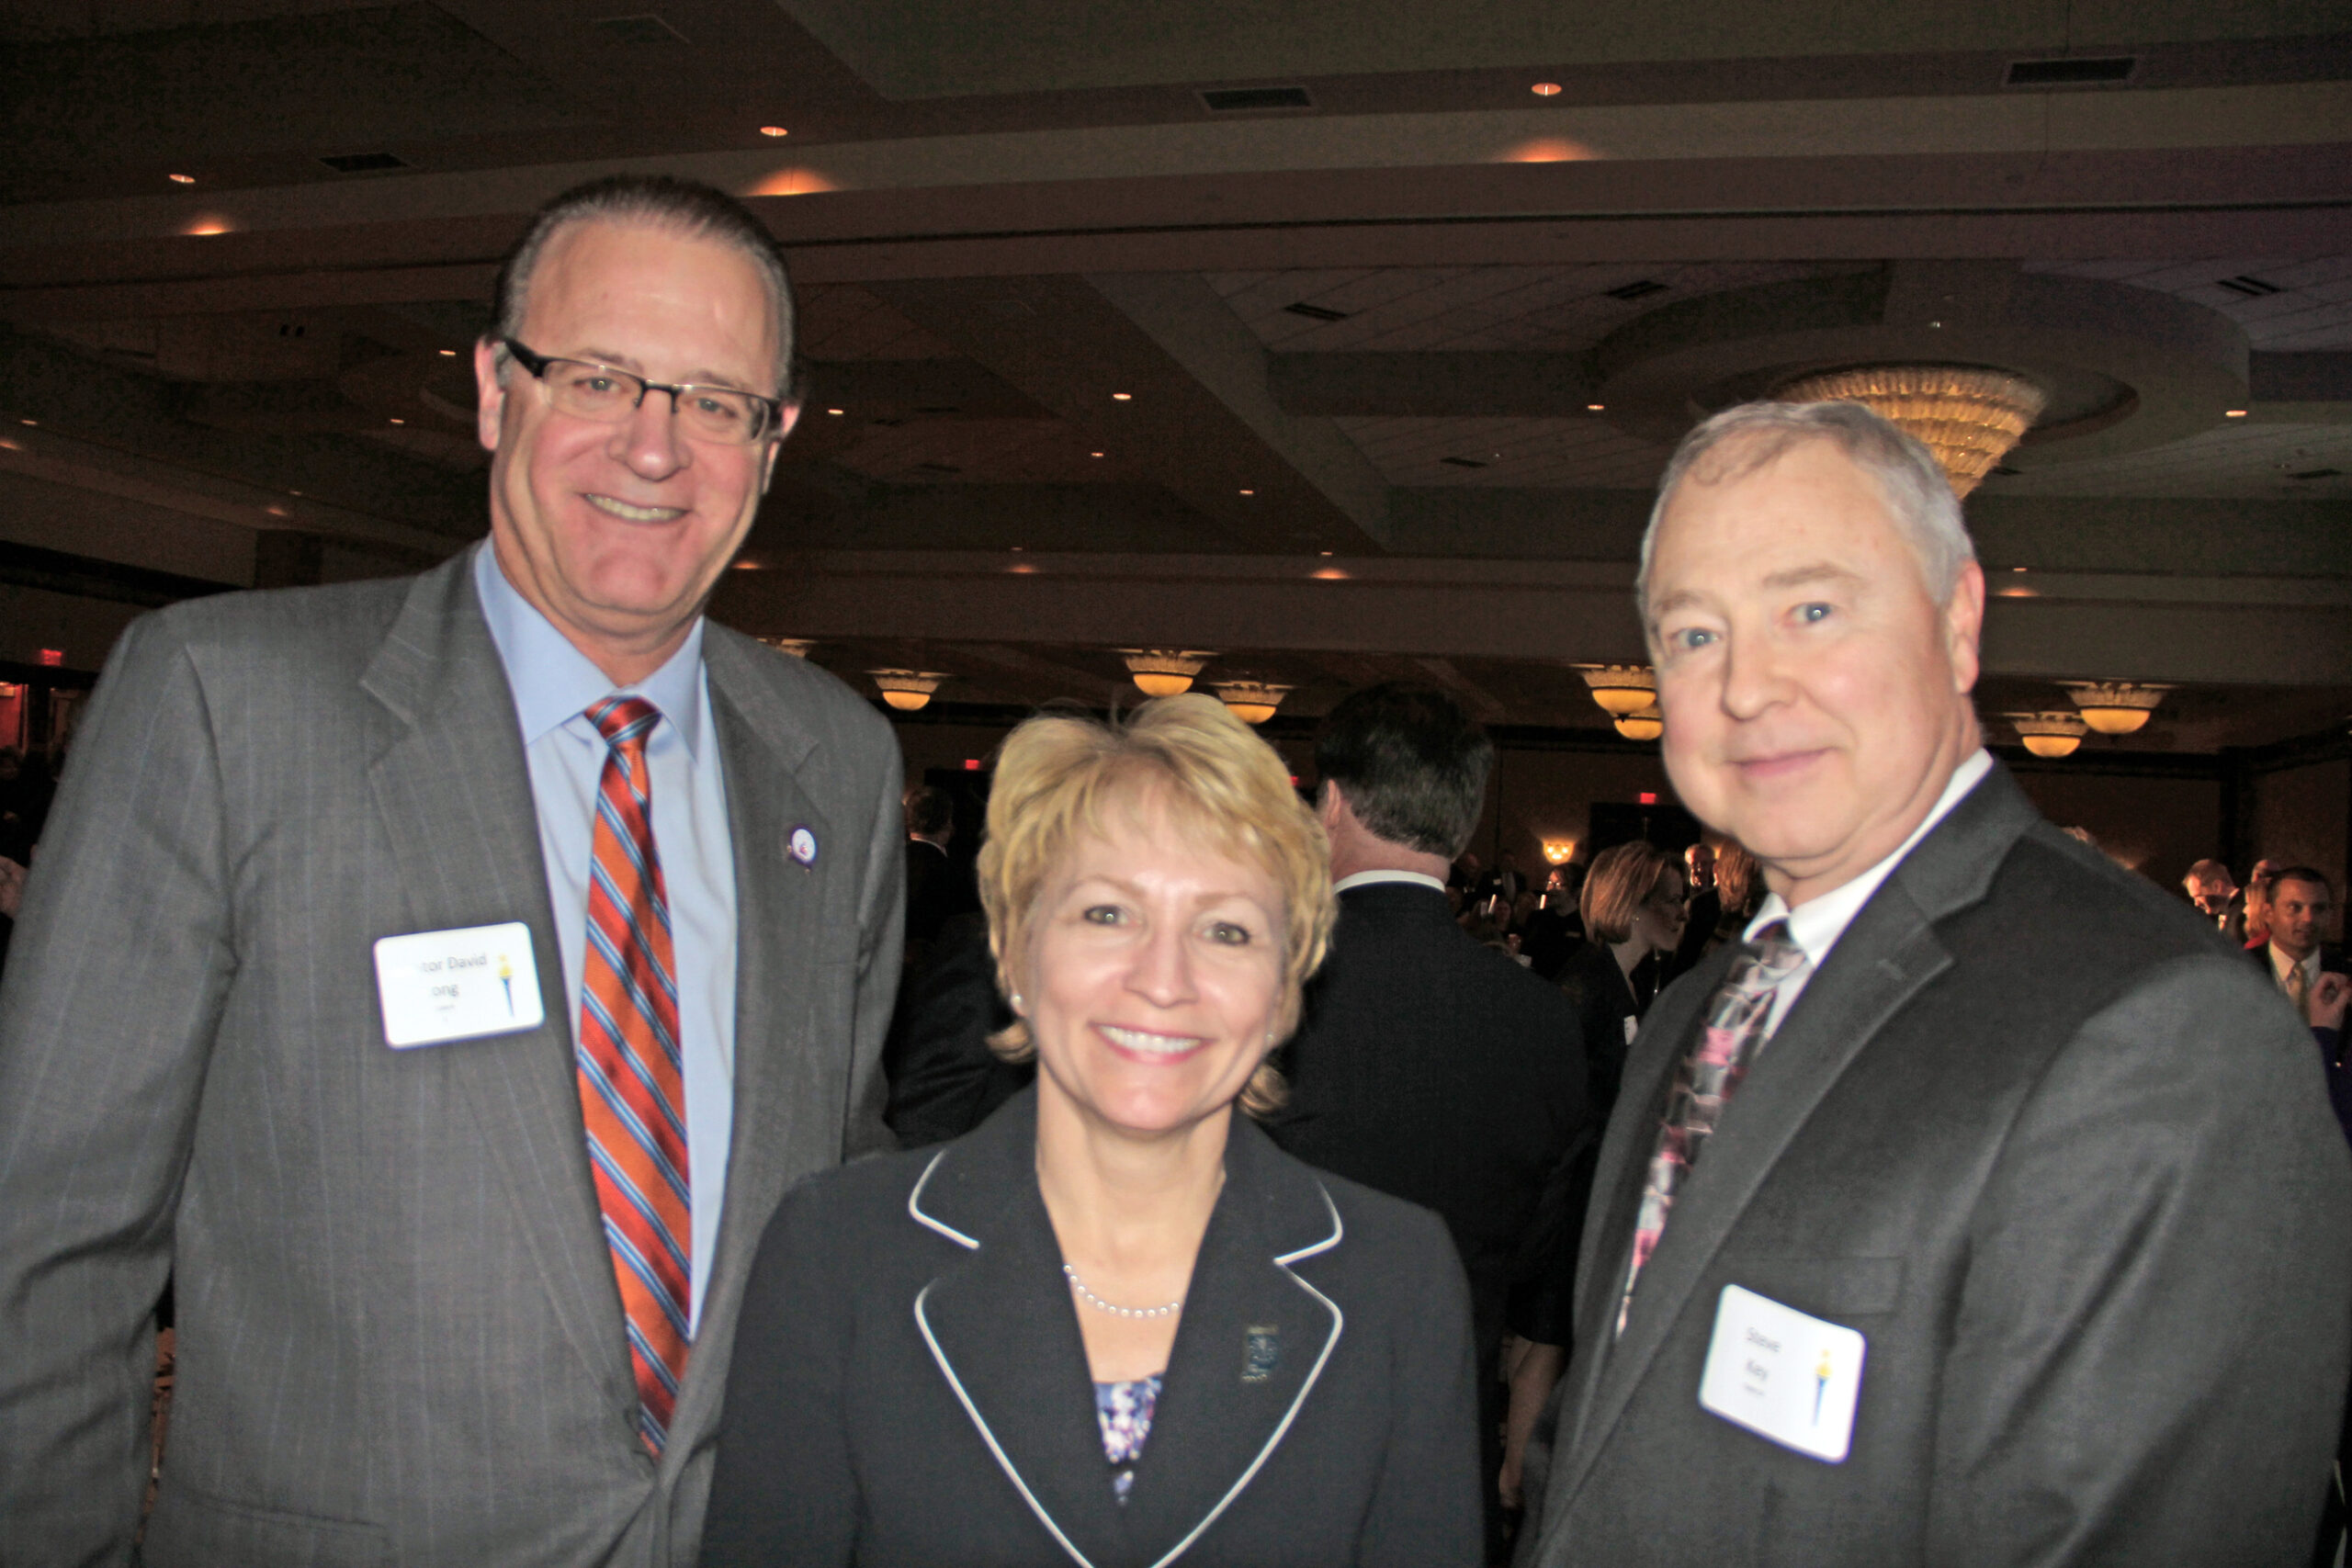 Meet and greet Steve Key (right), executive director and general coun­sel for HSPA, had the opportunity to chat with David Long of Fort Wayne (left), president pro tem of the Indiana Senate, and Lt. Gov. Sue Ellspermann of Ferdinand at a recent Indiana Republican Party dinner. Key was the guest of Bob Allman, president of the Indiana Republican Editorial Association and publisher of The New Era (Albion), Churubusco News, and Northwest News (Huntertown).